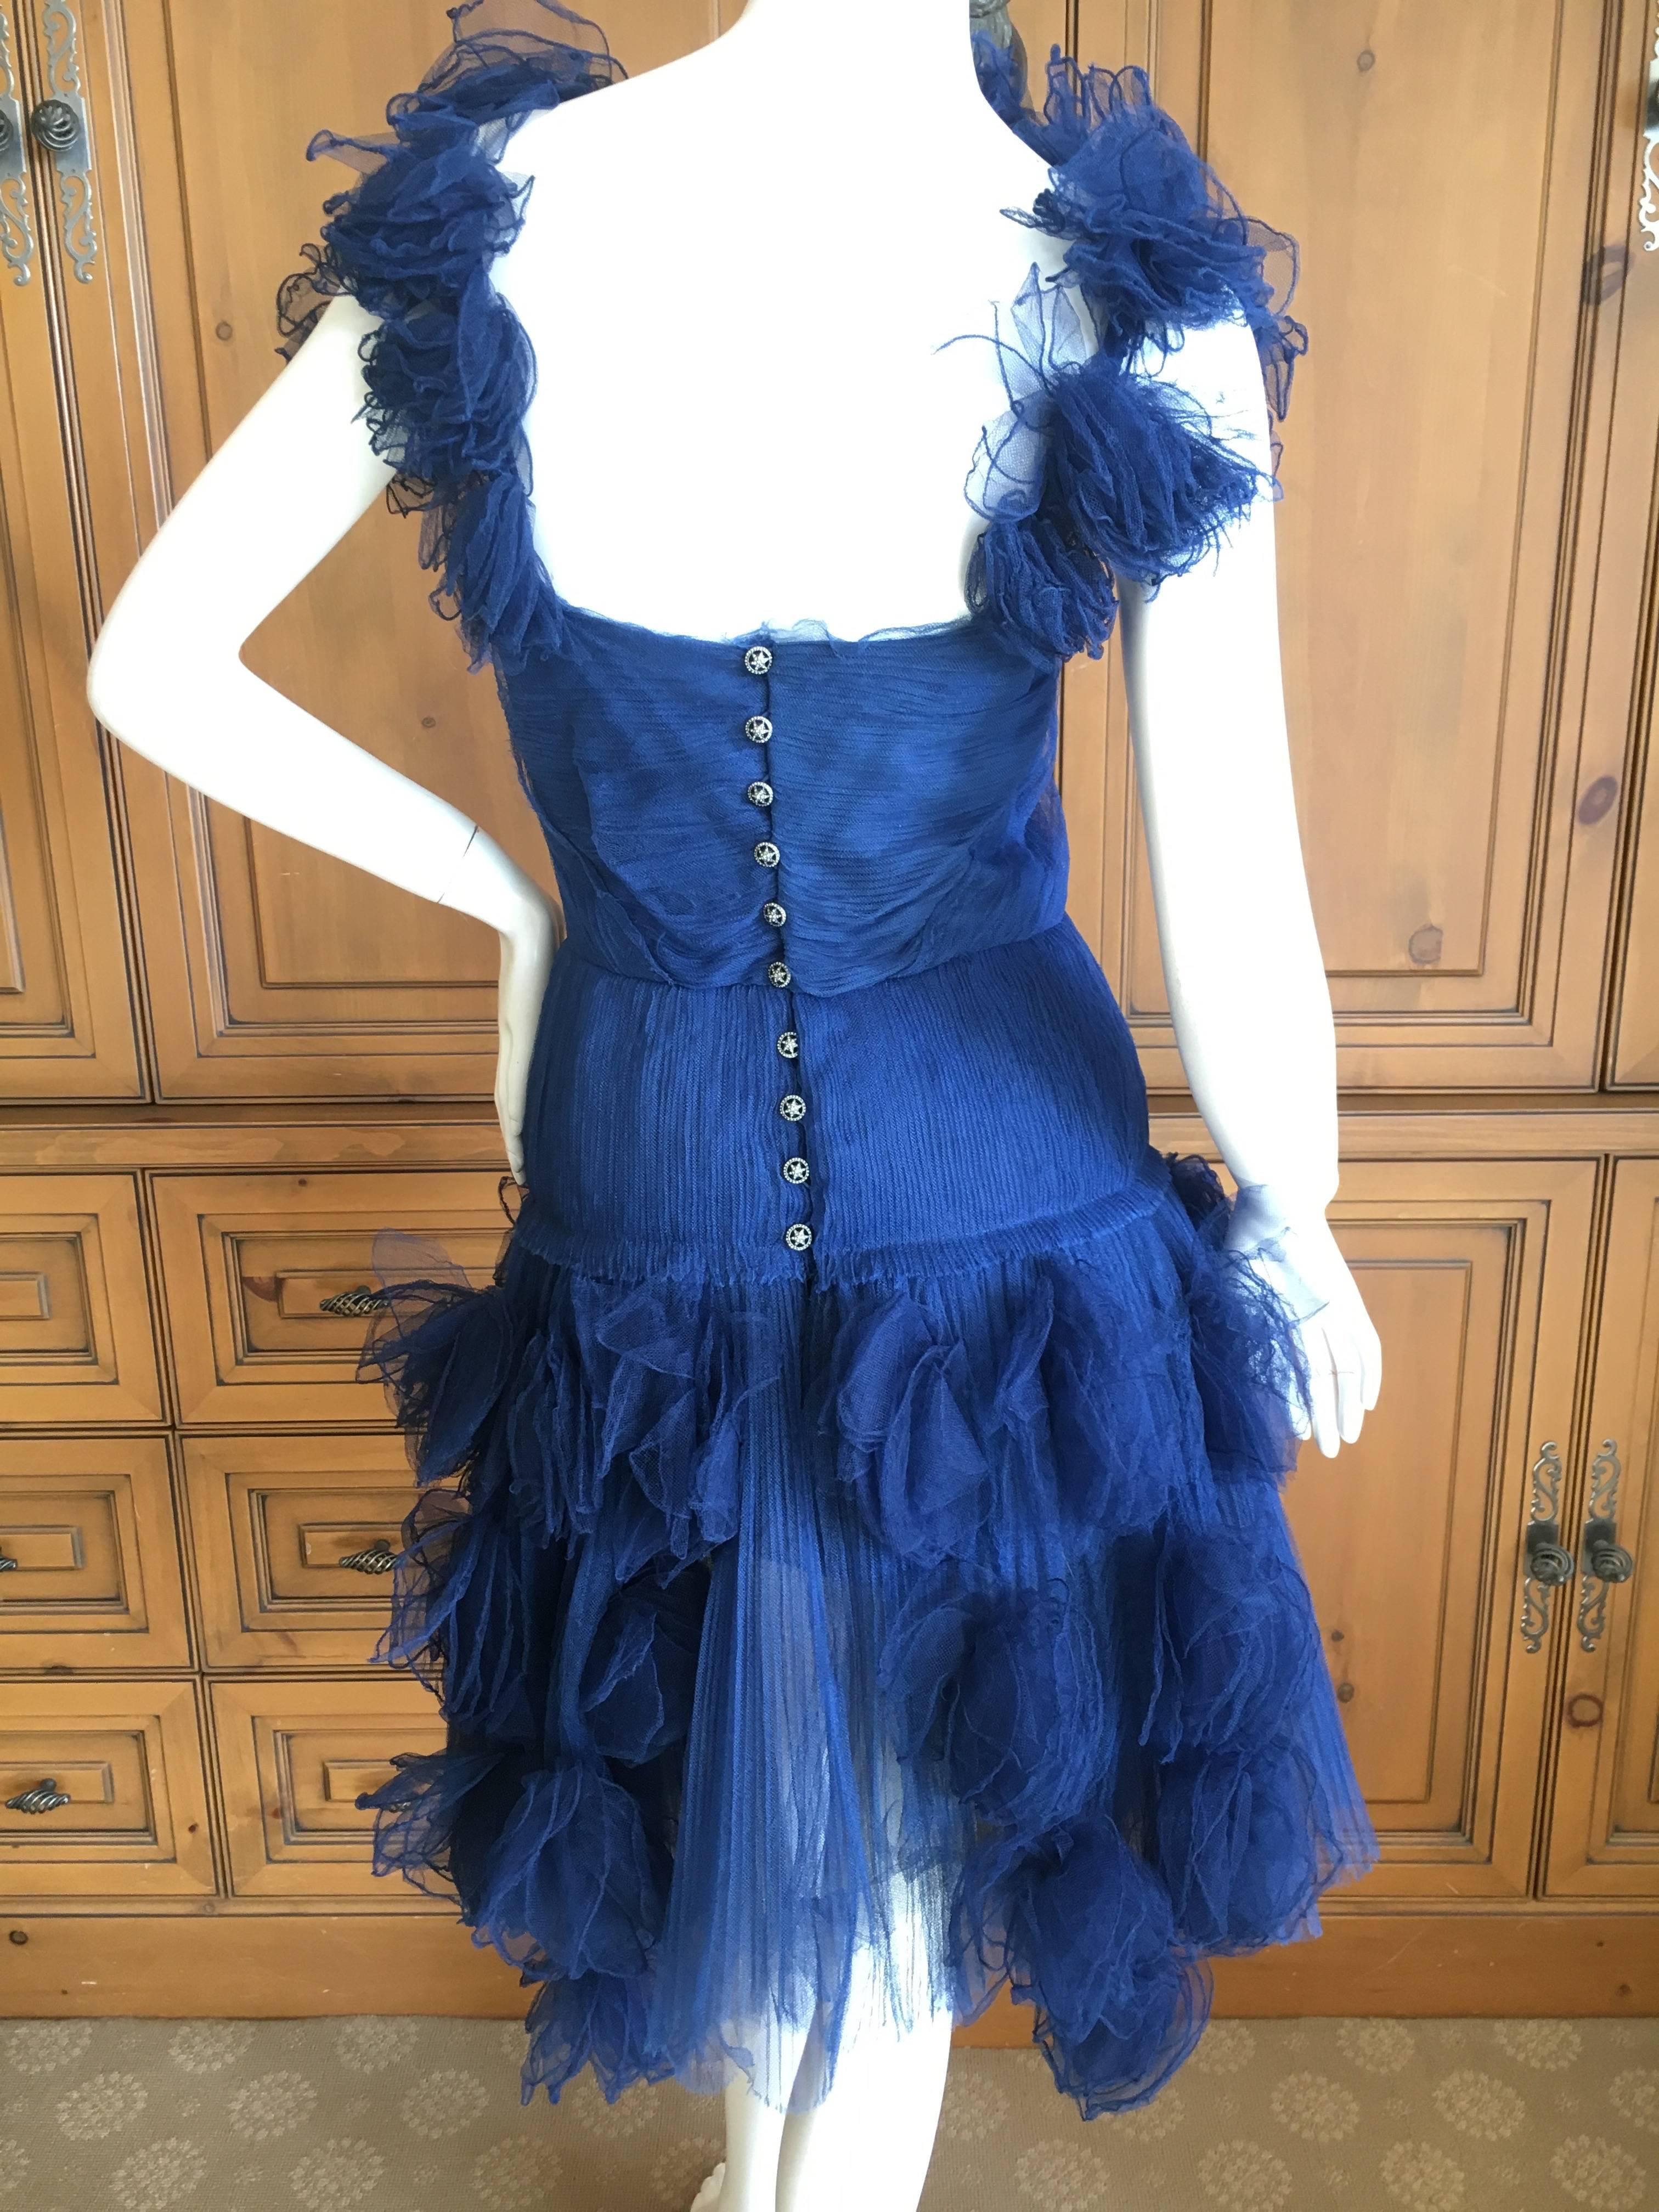 Chanel Romantic Vintage Blue Tulle Dress with Rosettes In Excellent Condition For Sale In Cloverdale, CA